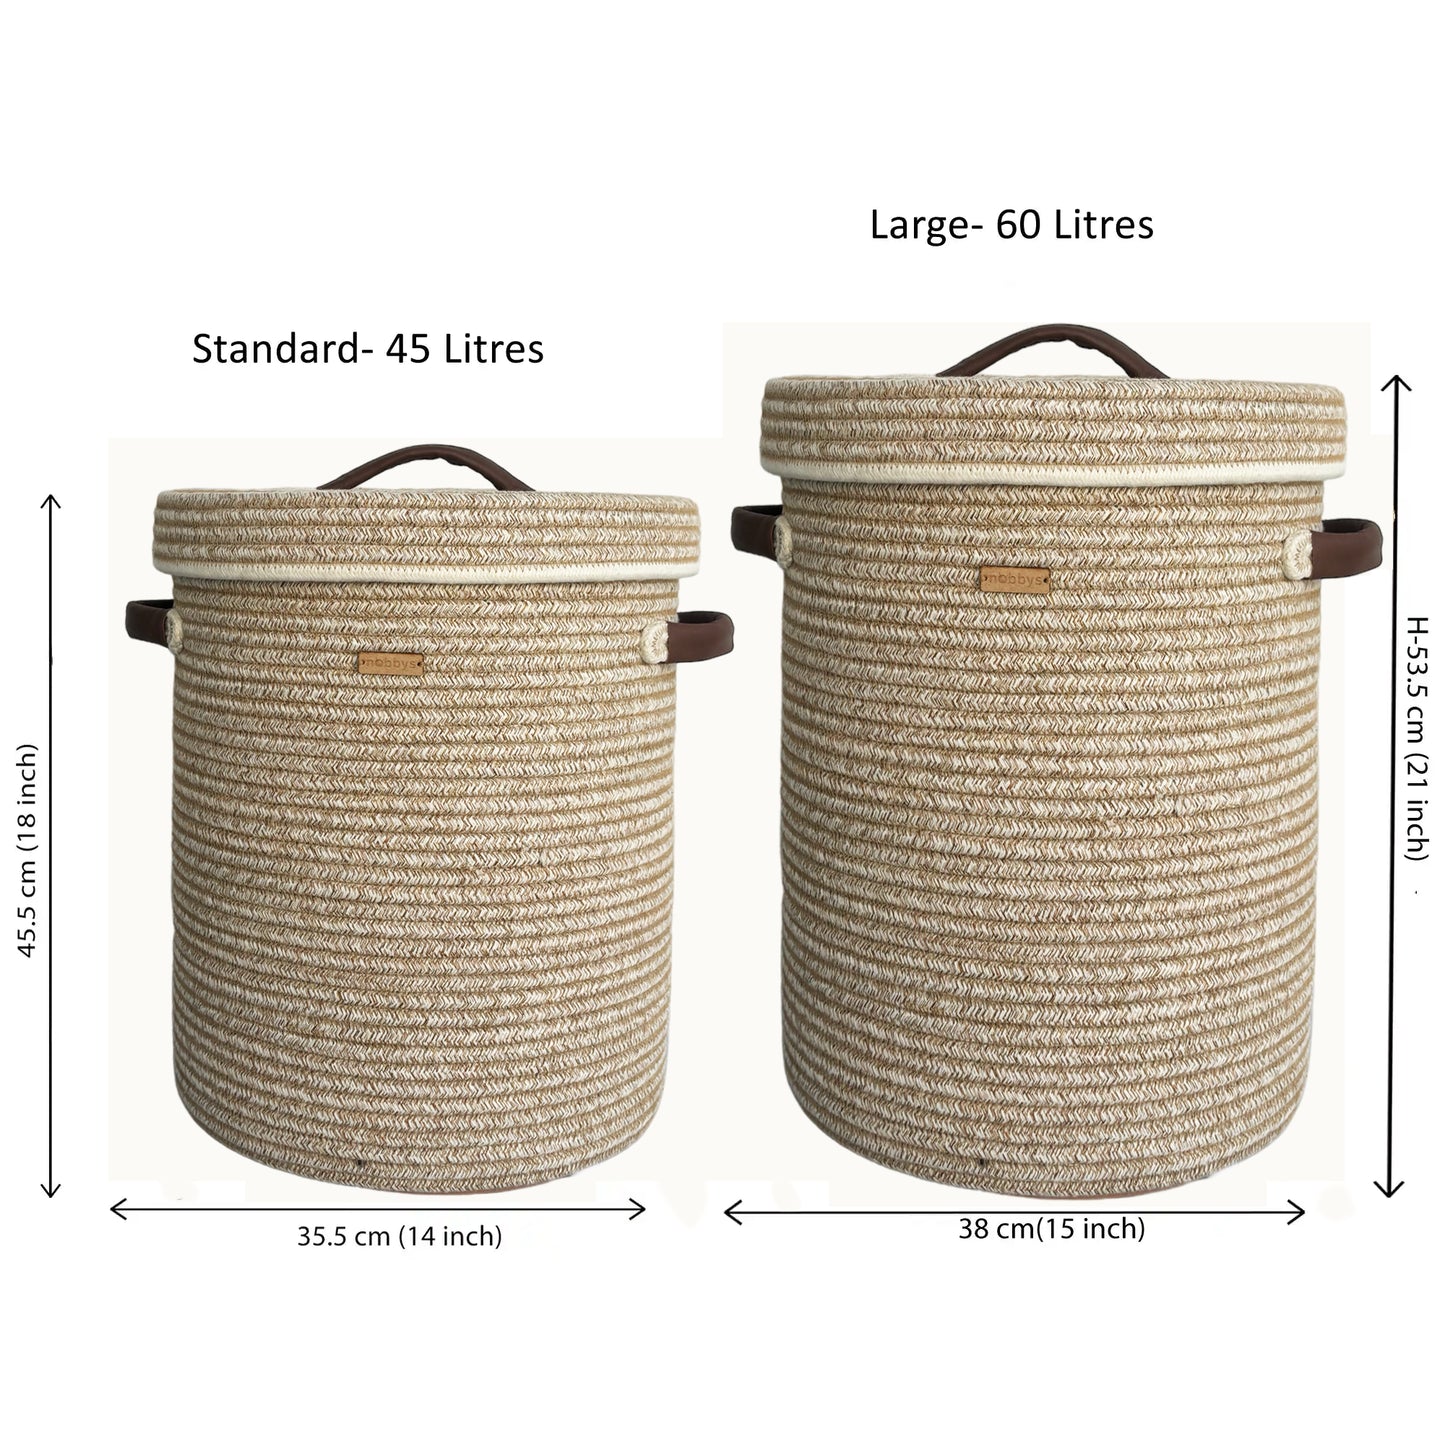 cotton laundry basket with leather handles